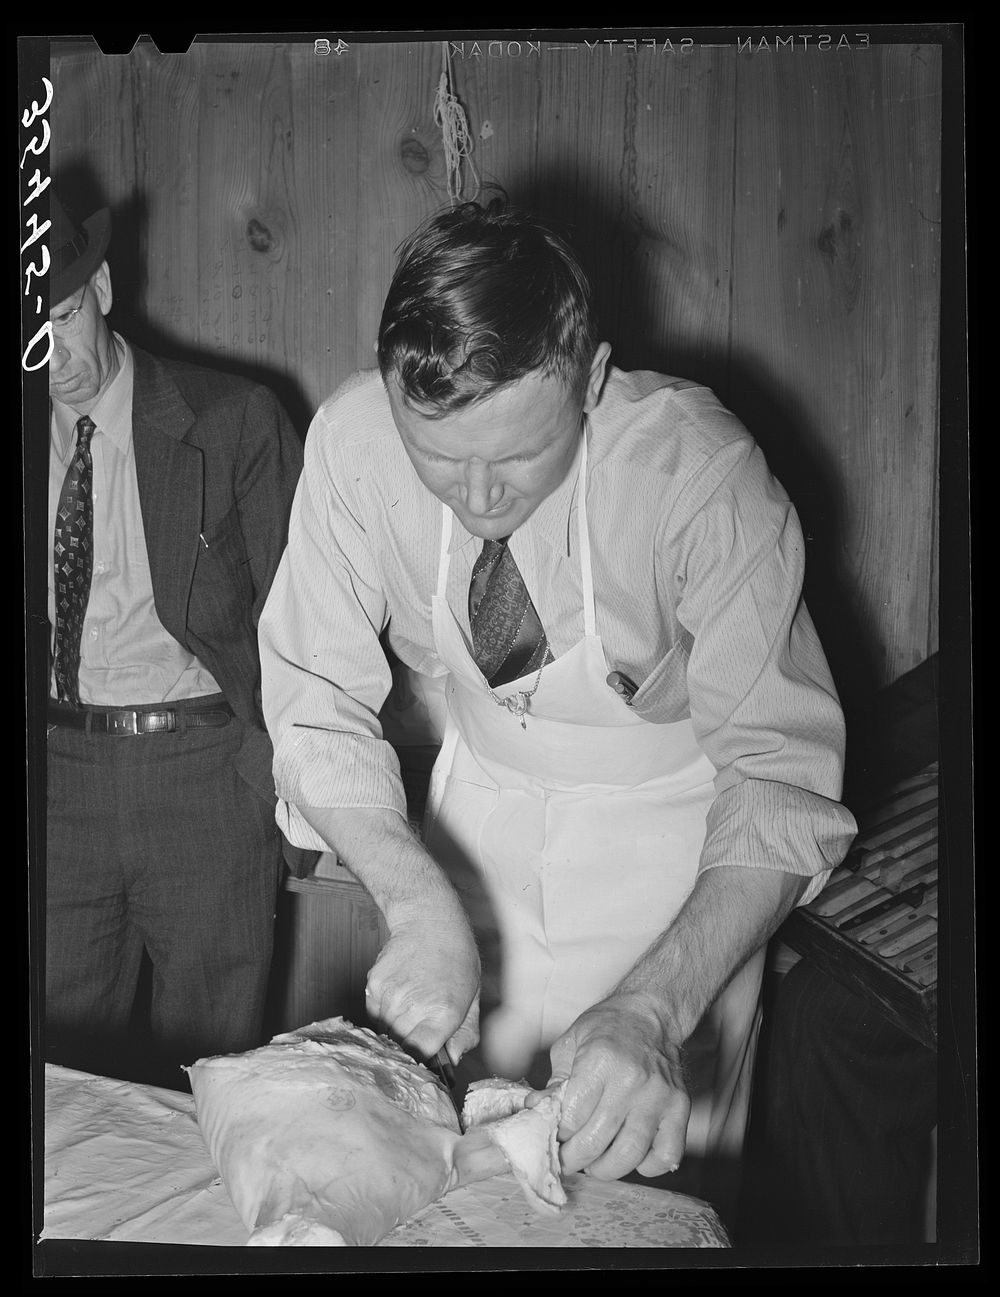 FSA (Farm Security Administration) supervisor who was formerly a meat cutter at a large packing plant giving a demonstration…